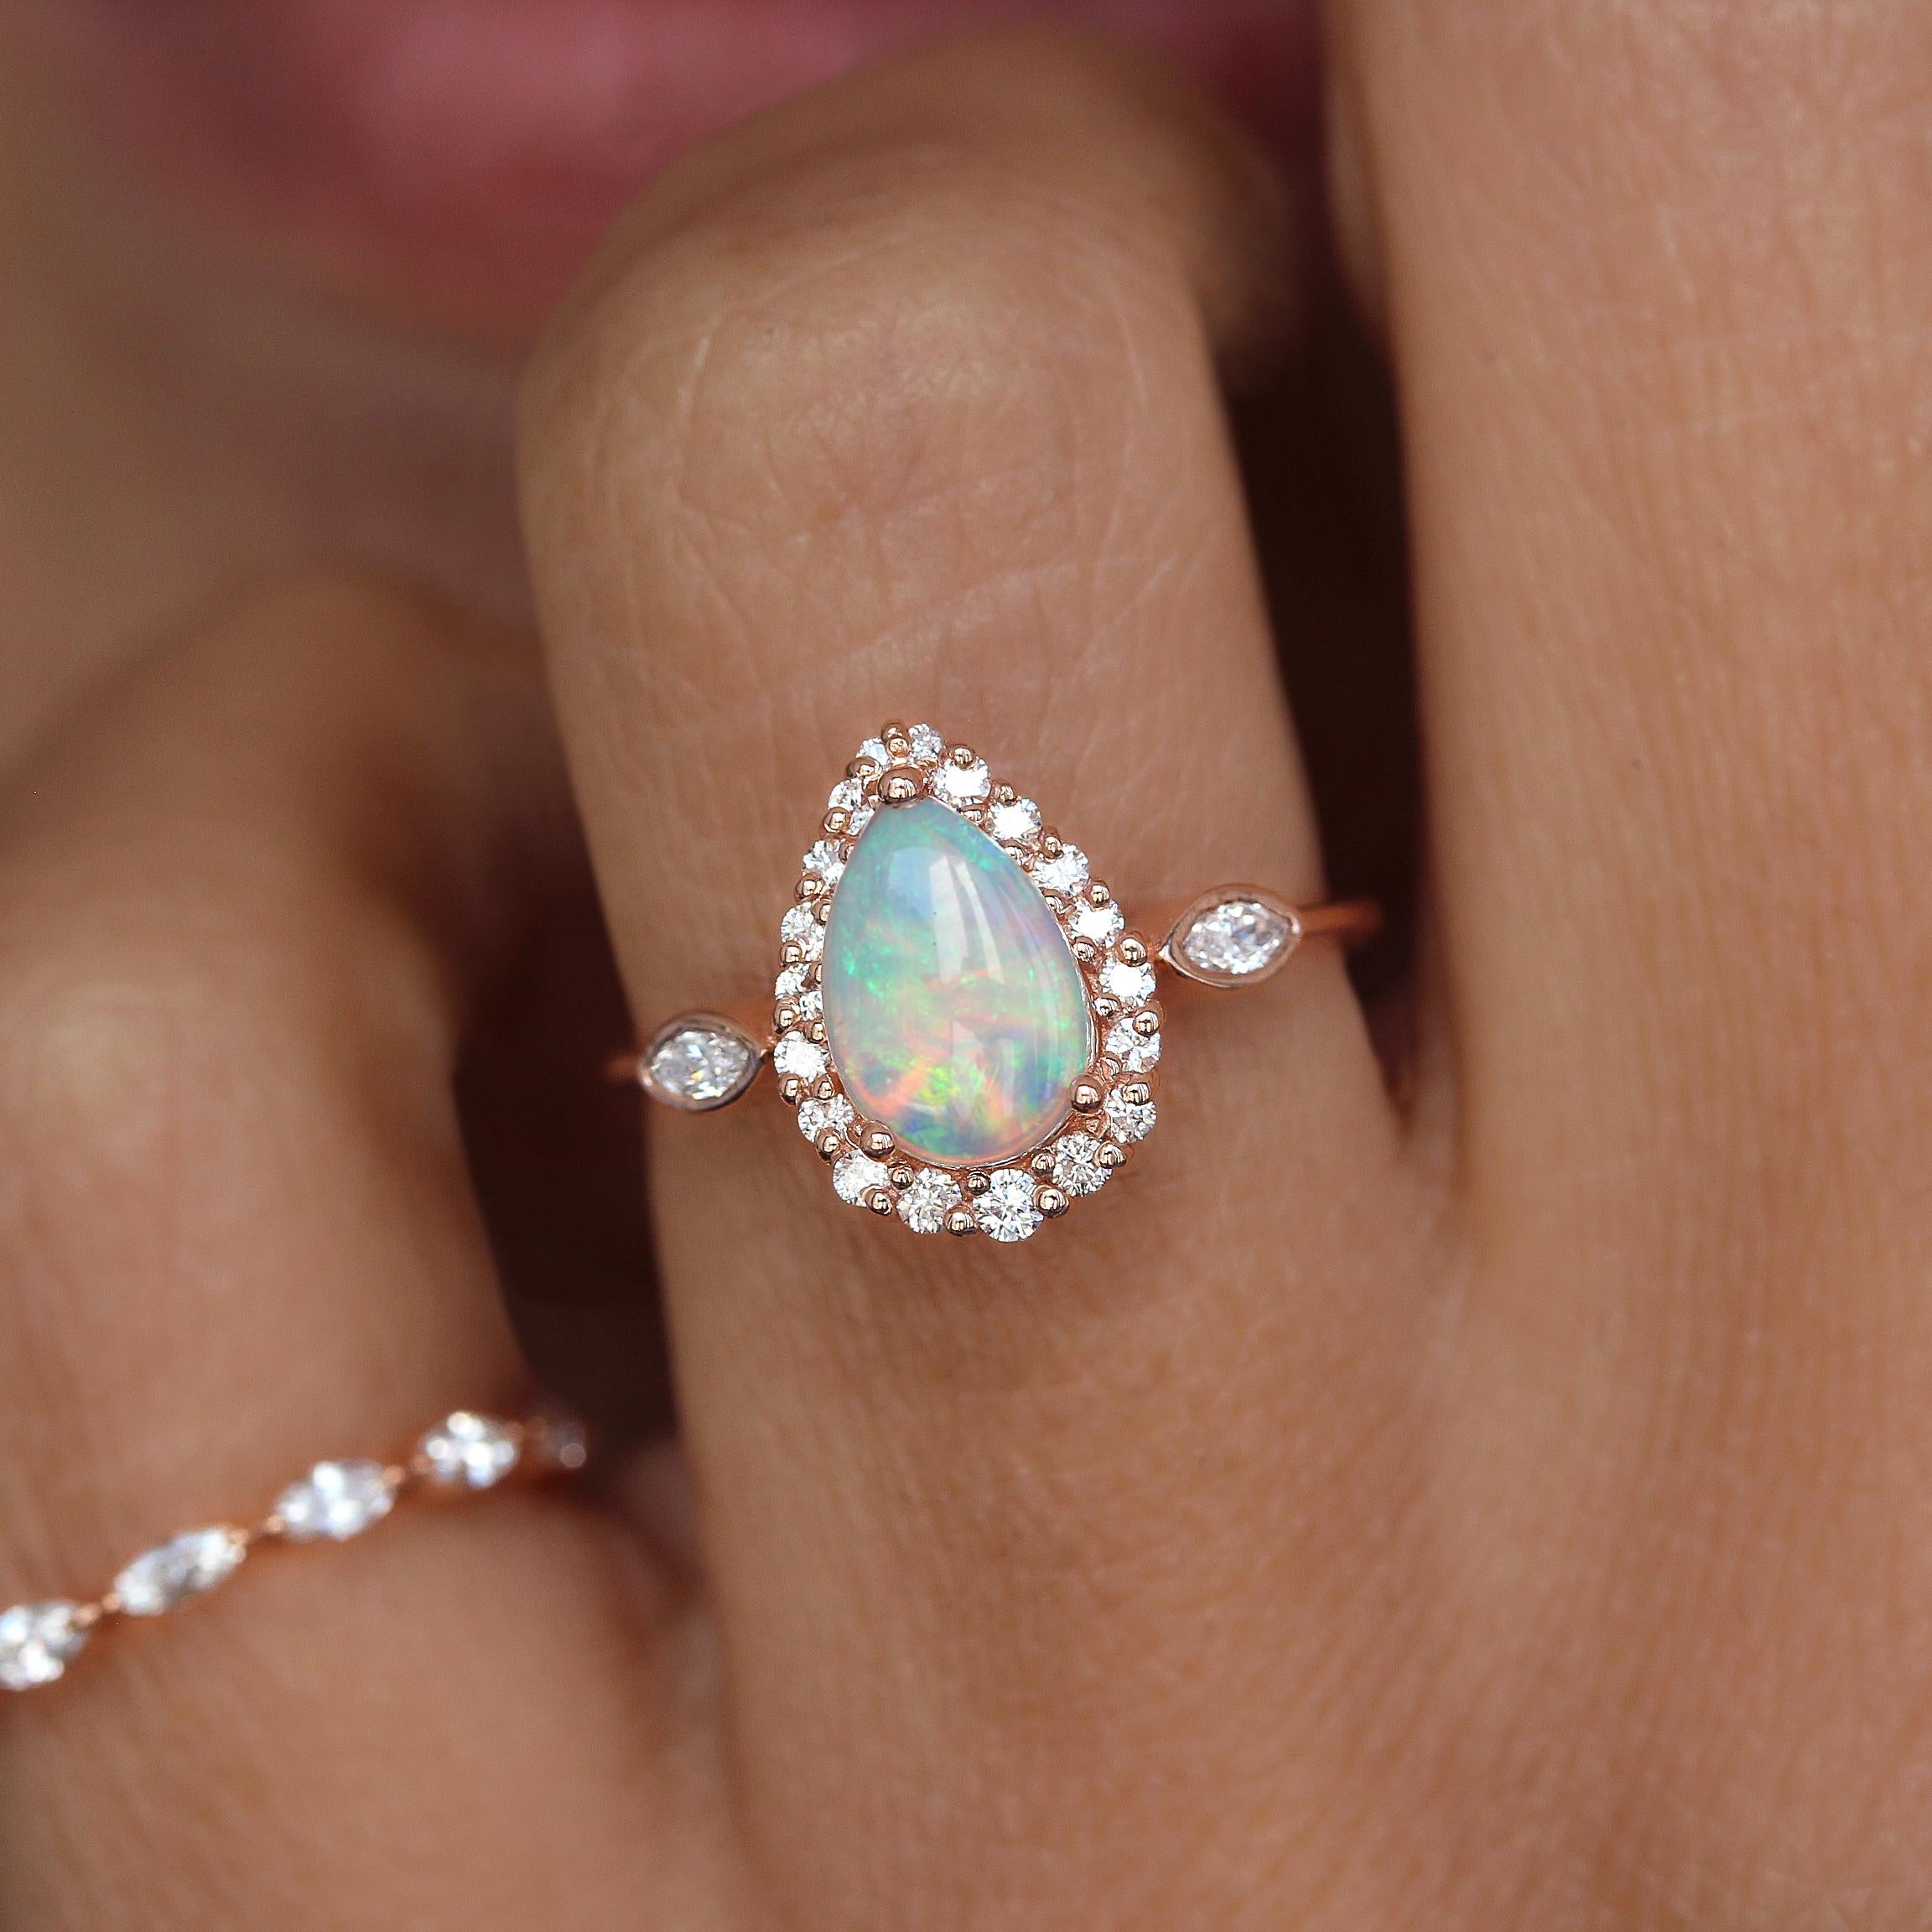 This pear opal halo engagement ring is a stunning piece of jewelry. It features a pear-shaped opal with marquise-cut side diamonds. The combination of hues and shapes creates a unique and eye-catching aesthetic, perfect for saying 